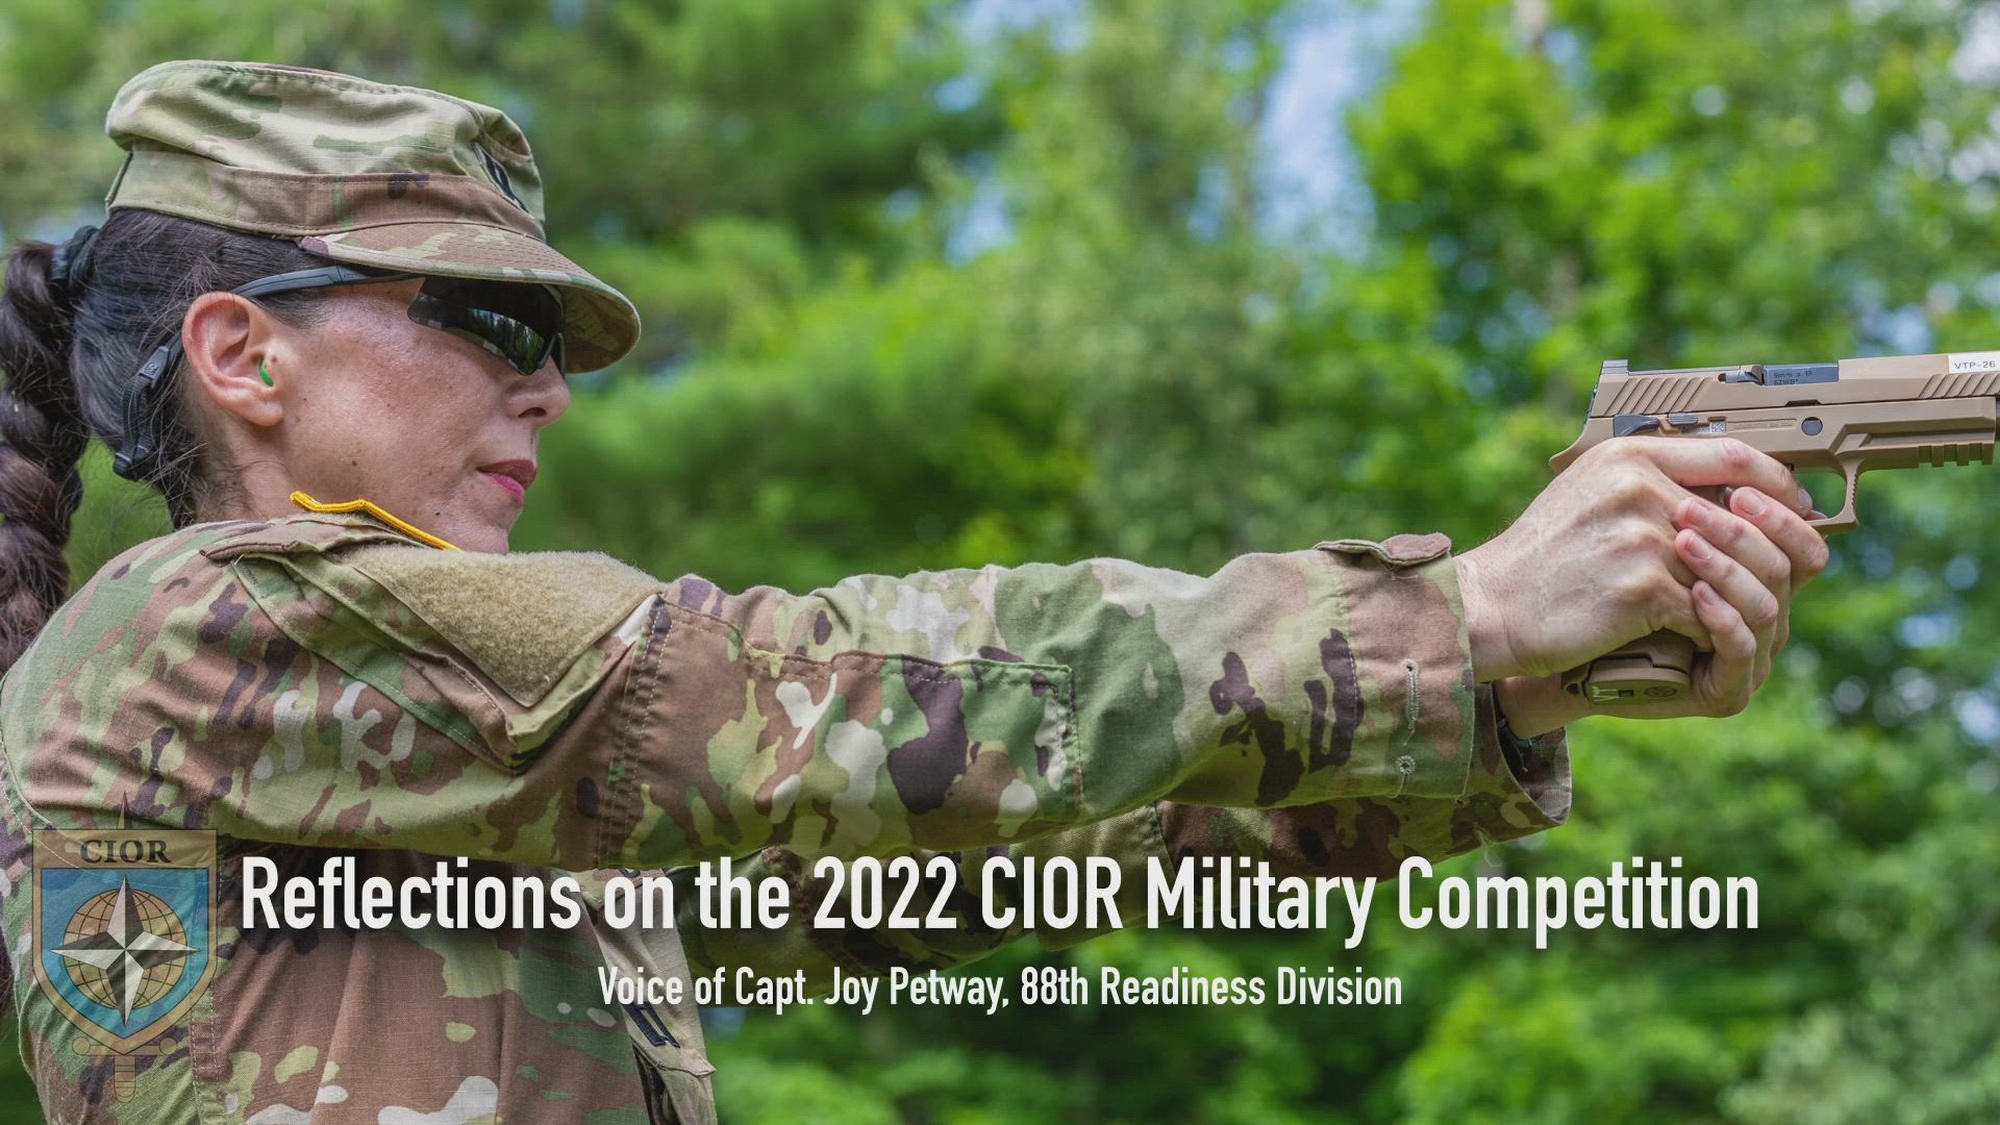 Capt. Joy Petway, 88th Readiness Division, reflects on her experience during the Interallied Confederation of Reserve Officers Military Competition (CIOR MILCOMP). This competition is an annual reserve military competition with NATO member states and other participating nations with 34 countries in total, representing 1.3 million reservists. The MILCOMP, which has been held since 1957, is a military pentathlon testing service members in pistol and rifle marksmanship, land and water obstacles and orienteering.